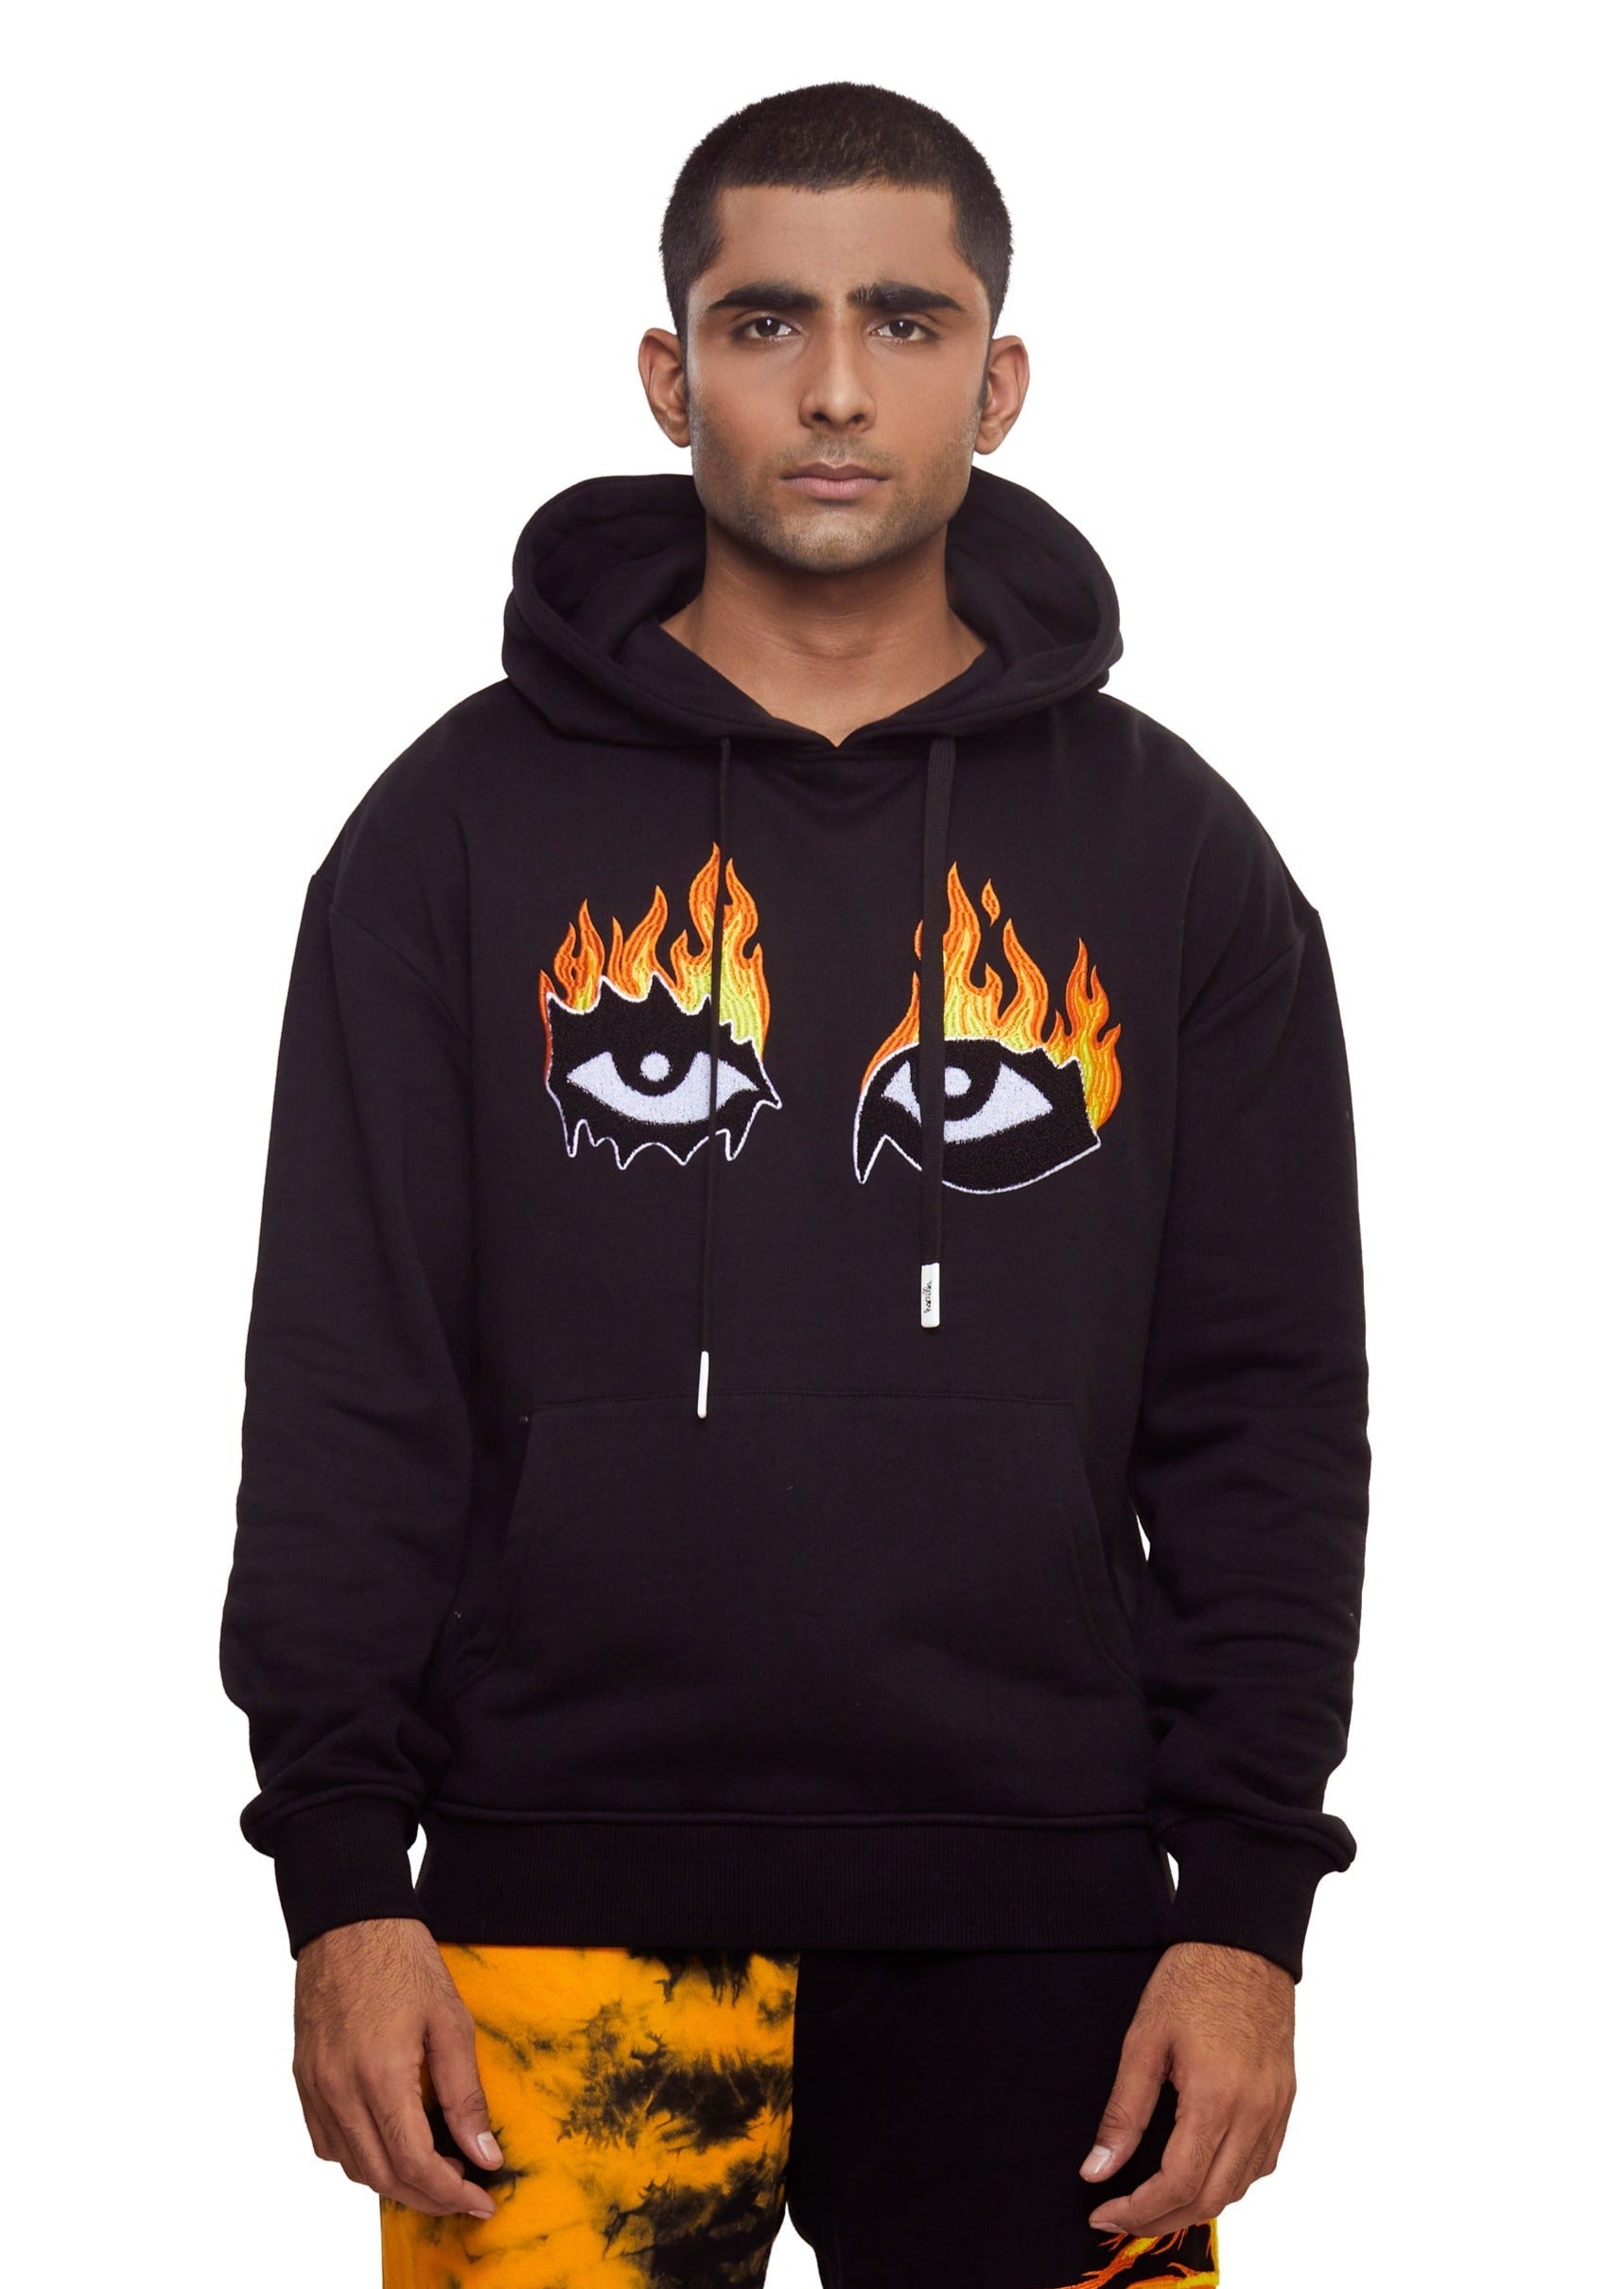 Black Cotton "Eyes on Fire" embroidered and printed over-sized drop shoulder pull-over hoodie from the brand Haculla